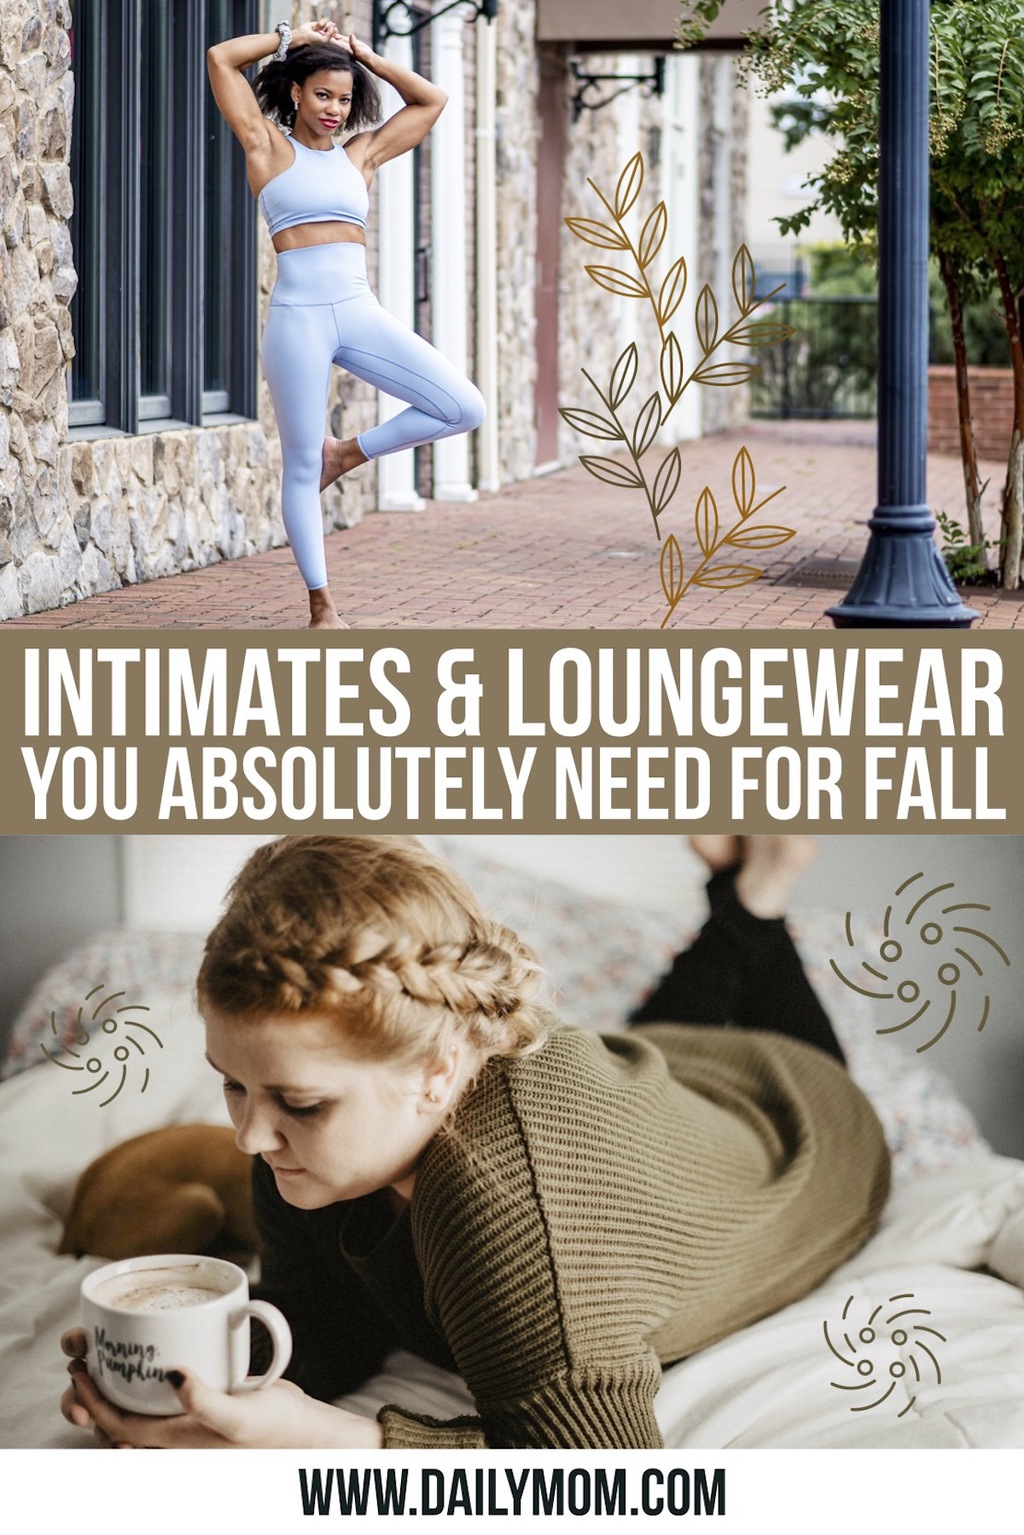 17 Comfy Intimates And Cozy Loungewear You Absolutely Need For Fall